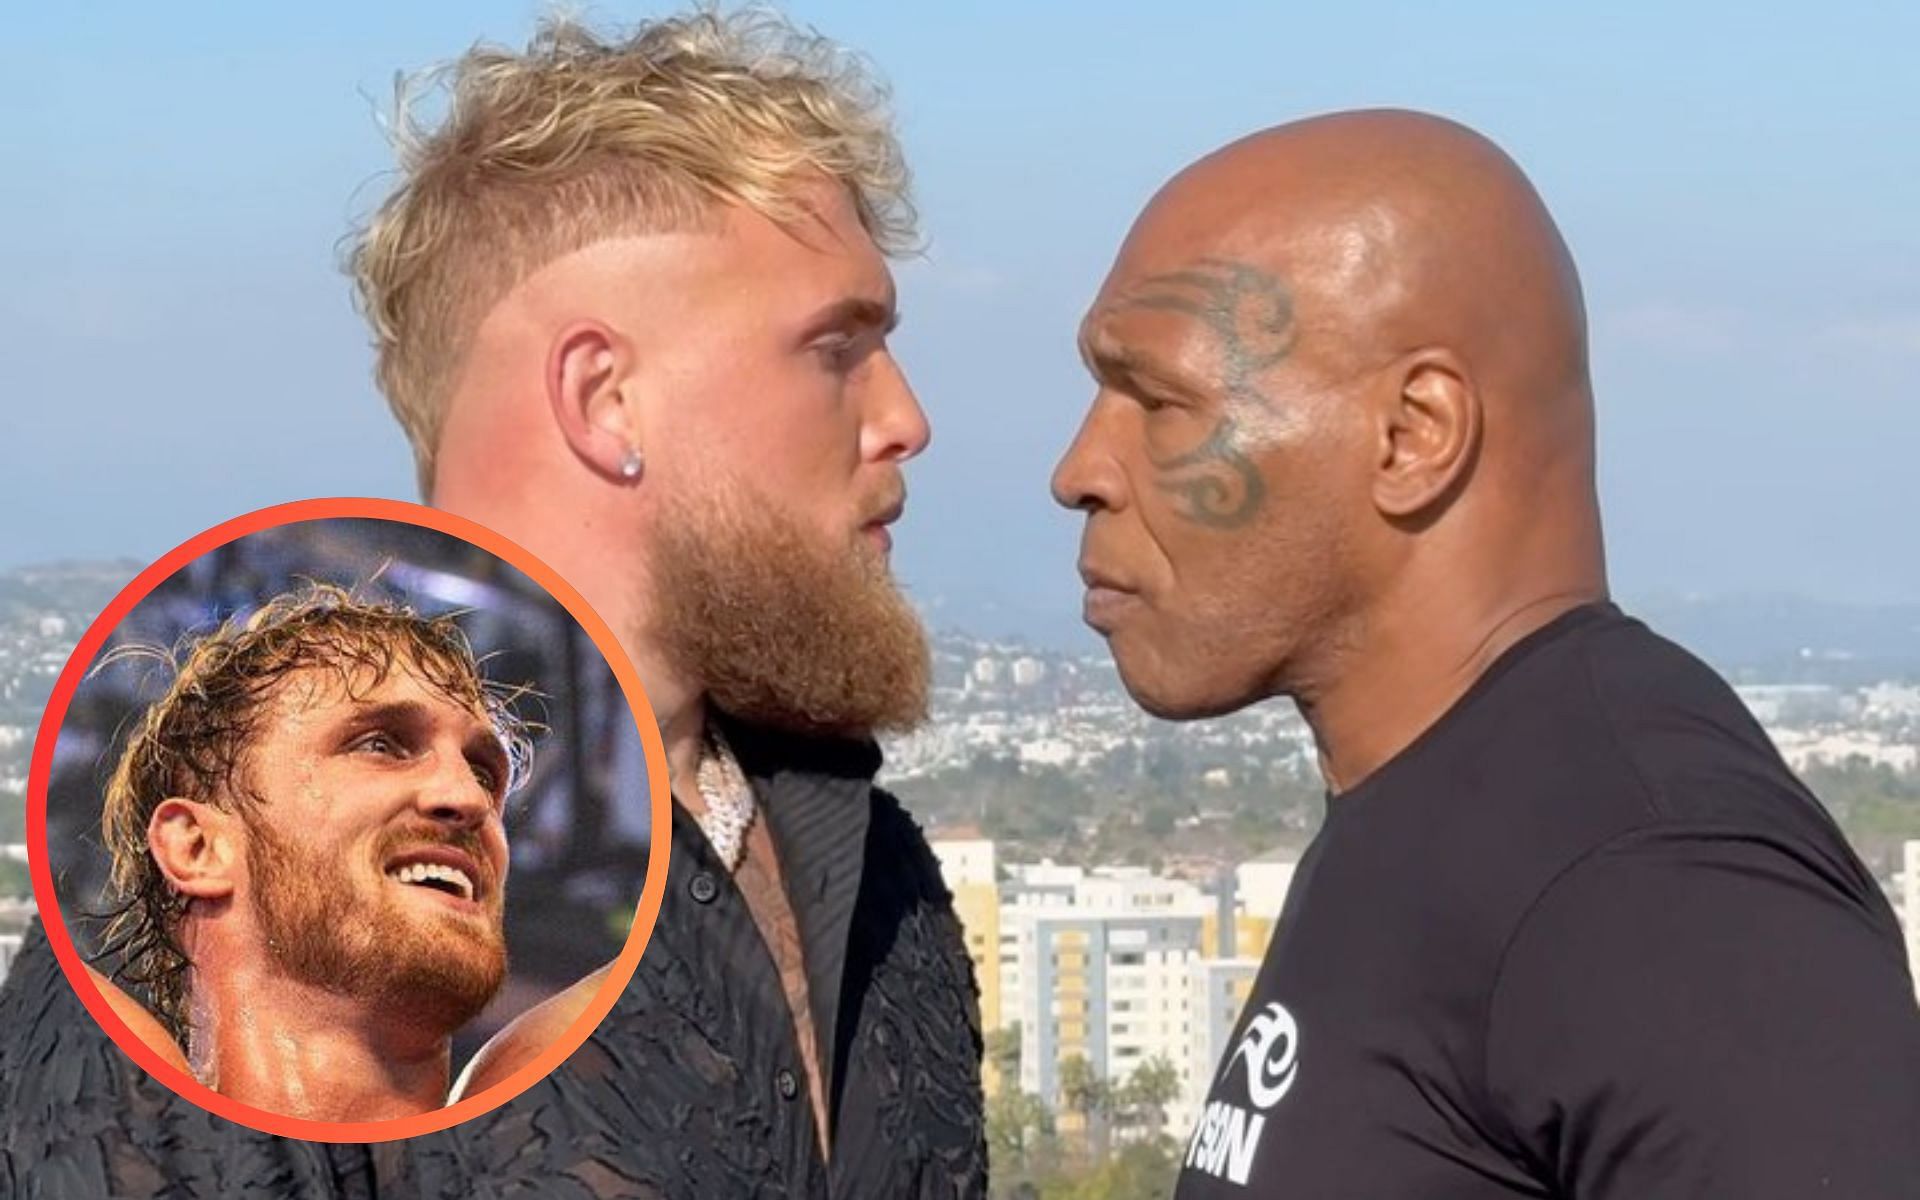 Logan Paul claims he declined an opportunity to fight Mike Tyson before his brother Jake Paul accepted it